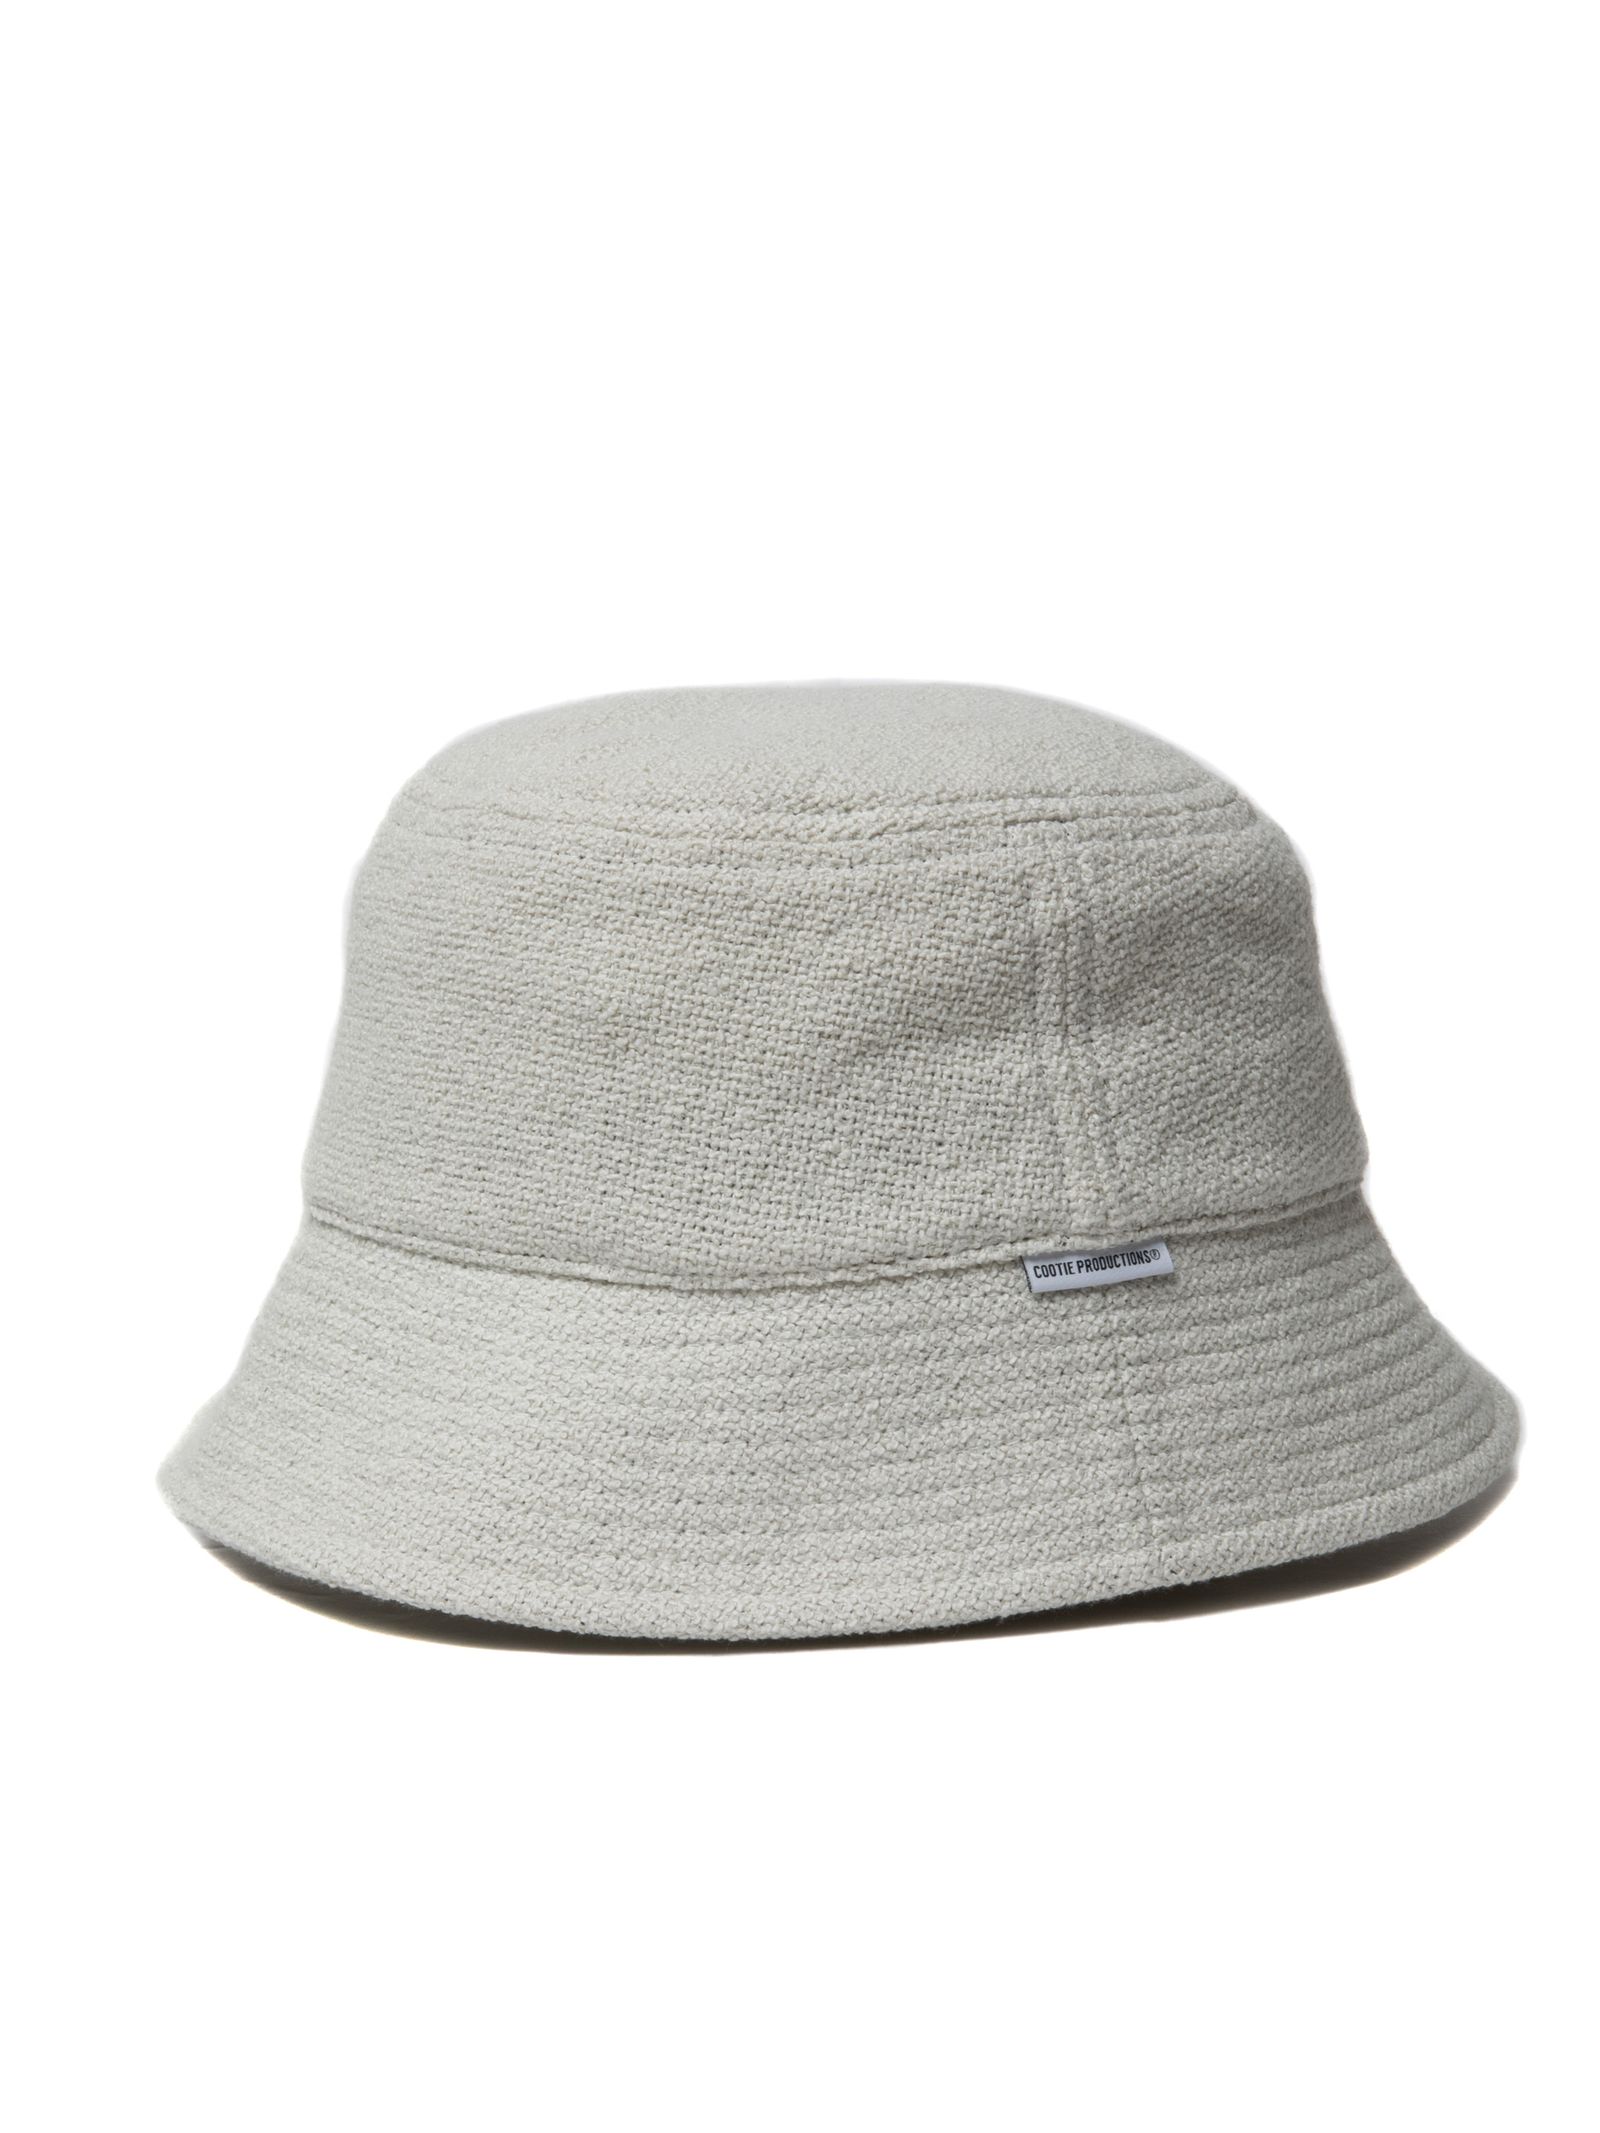 COOTIE PRODUCTIONS - N/C OX Bucket Hat / Off Ivory / バケット 